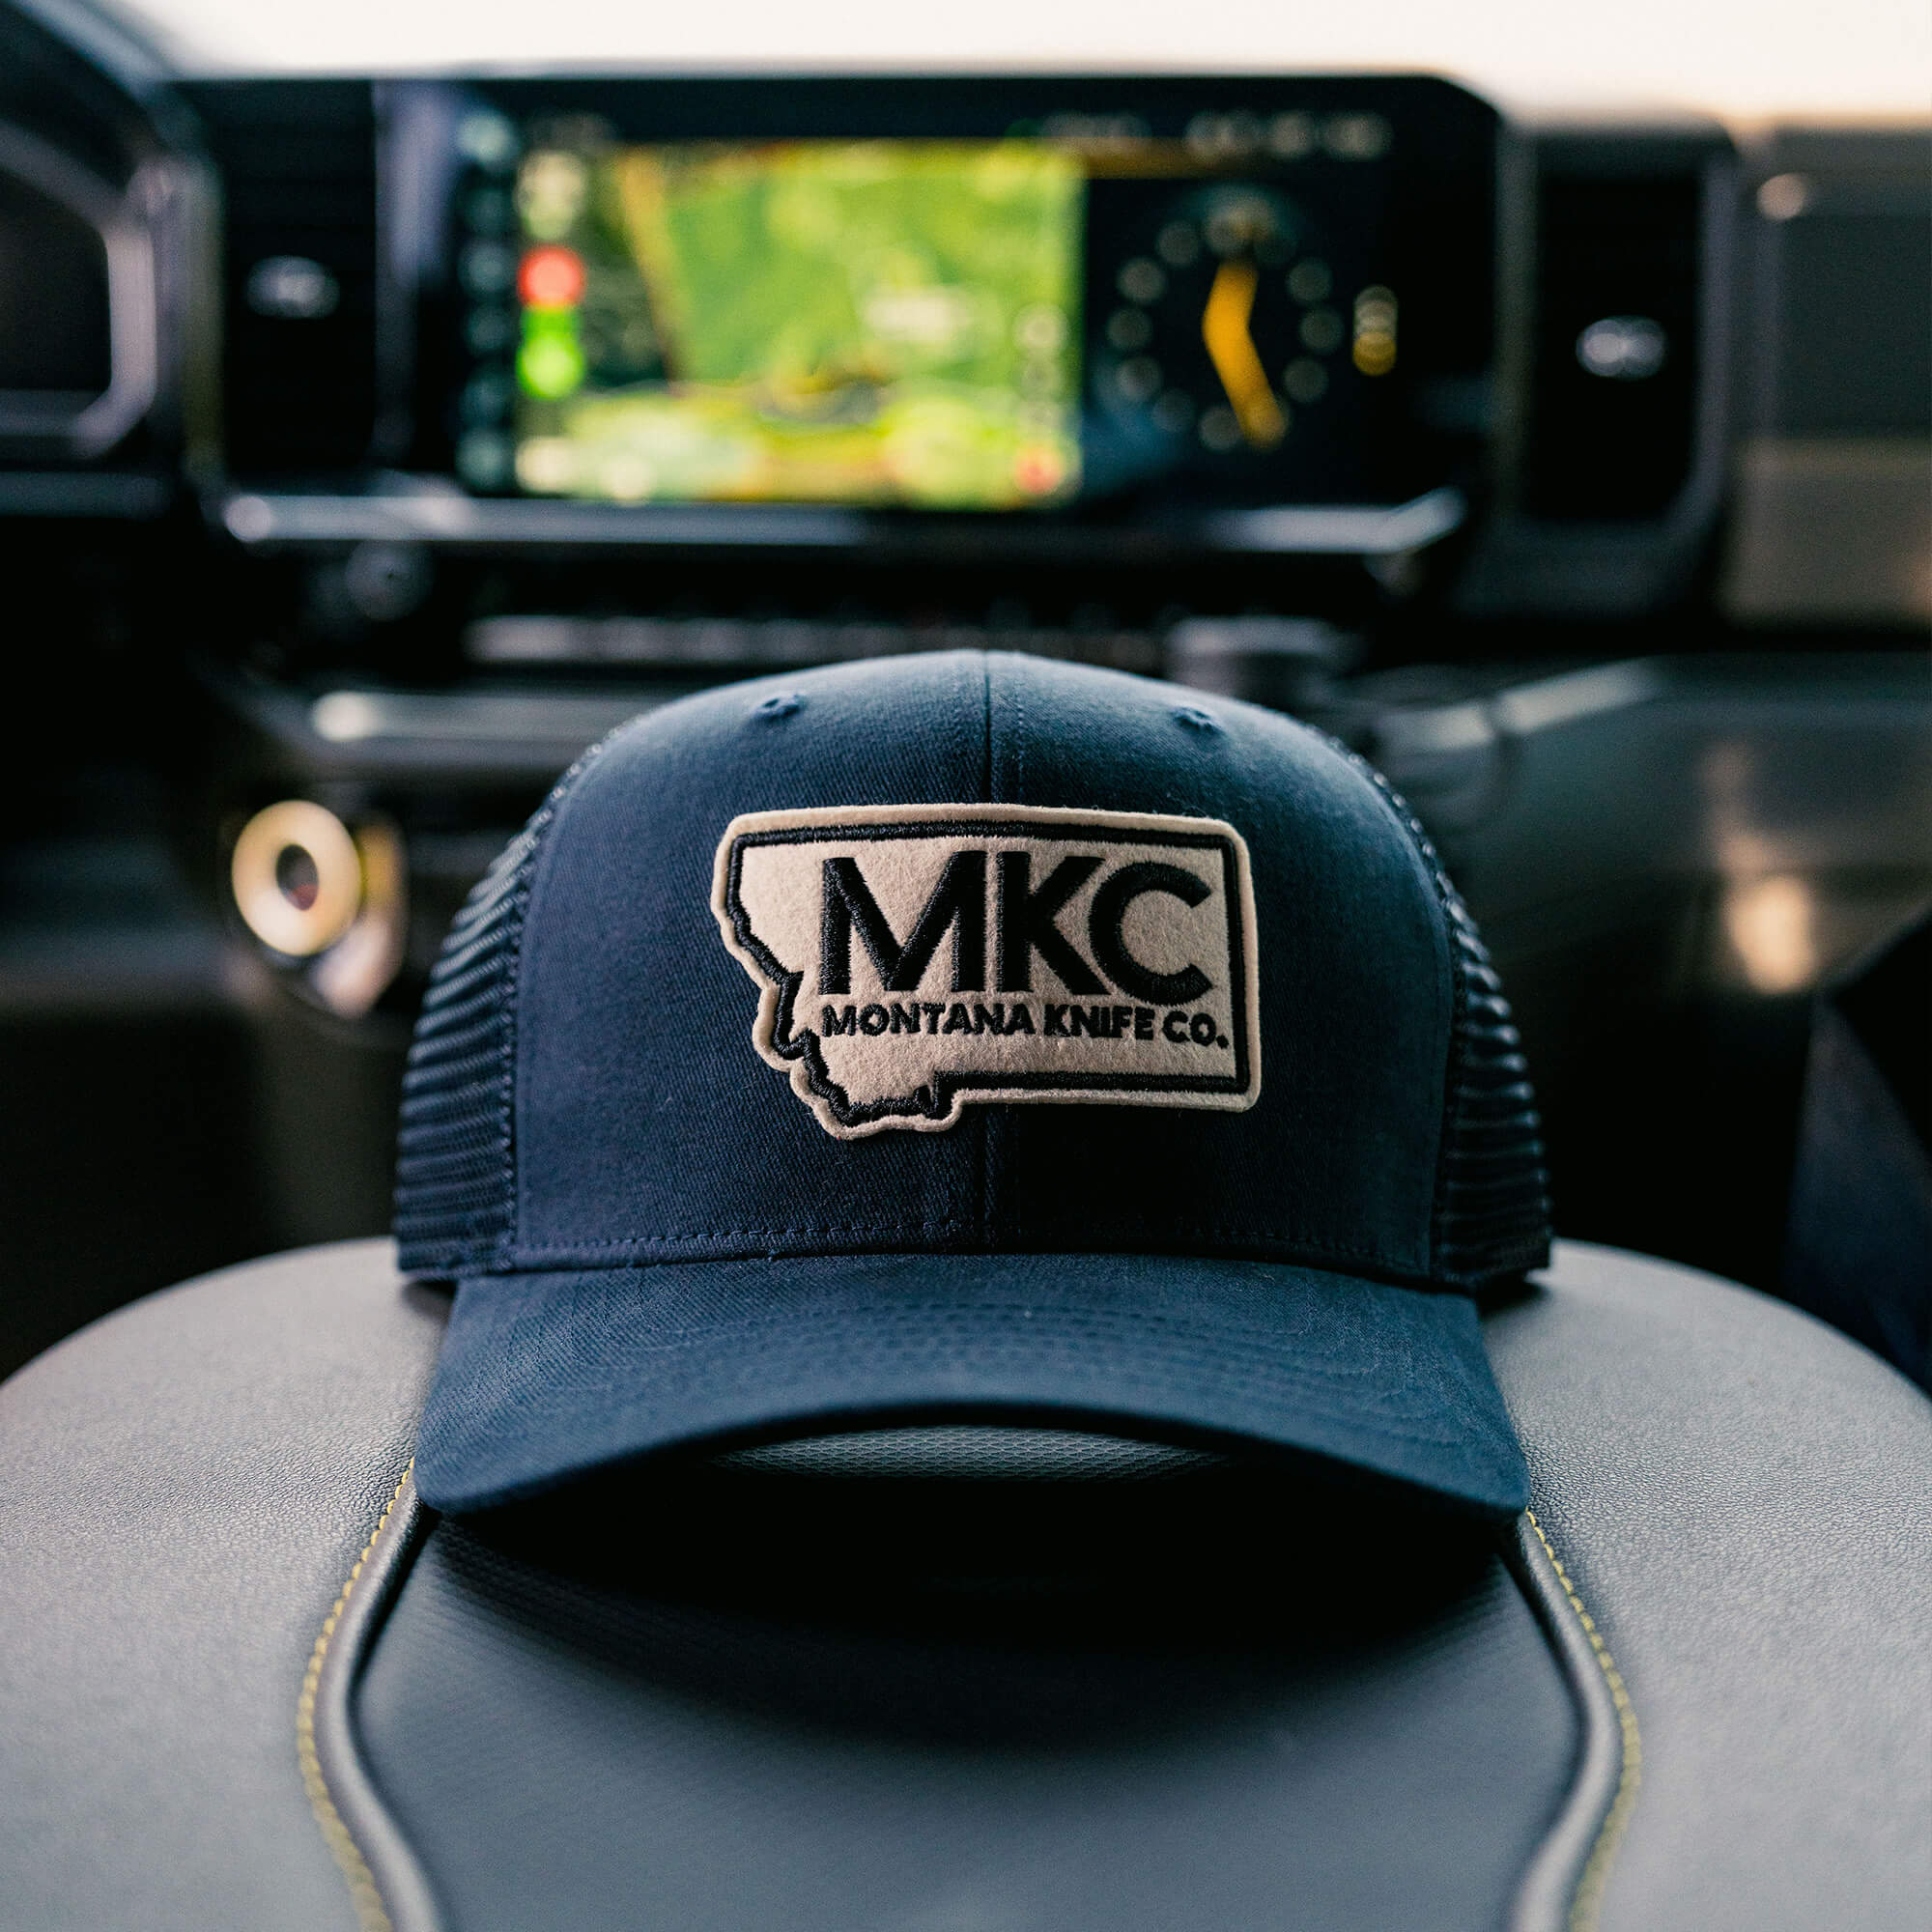 MKC EMBROIDERED FELT PATCH SNAPBACK - NAVY